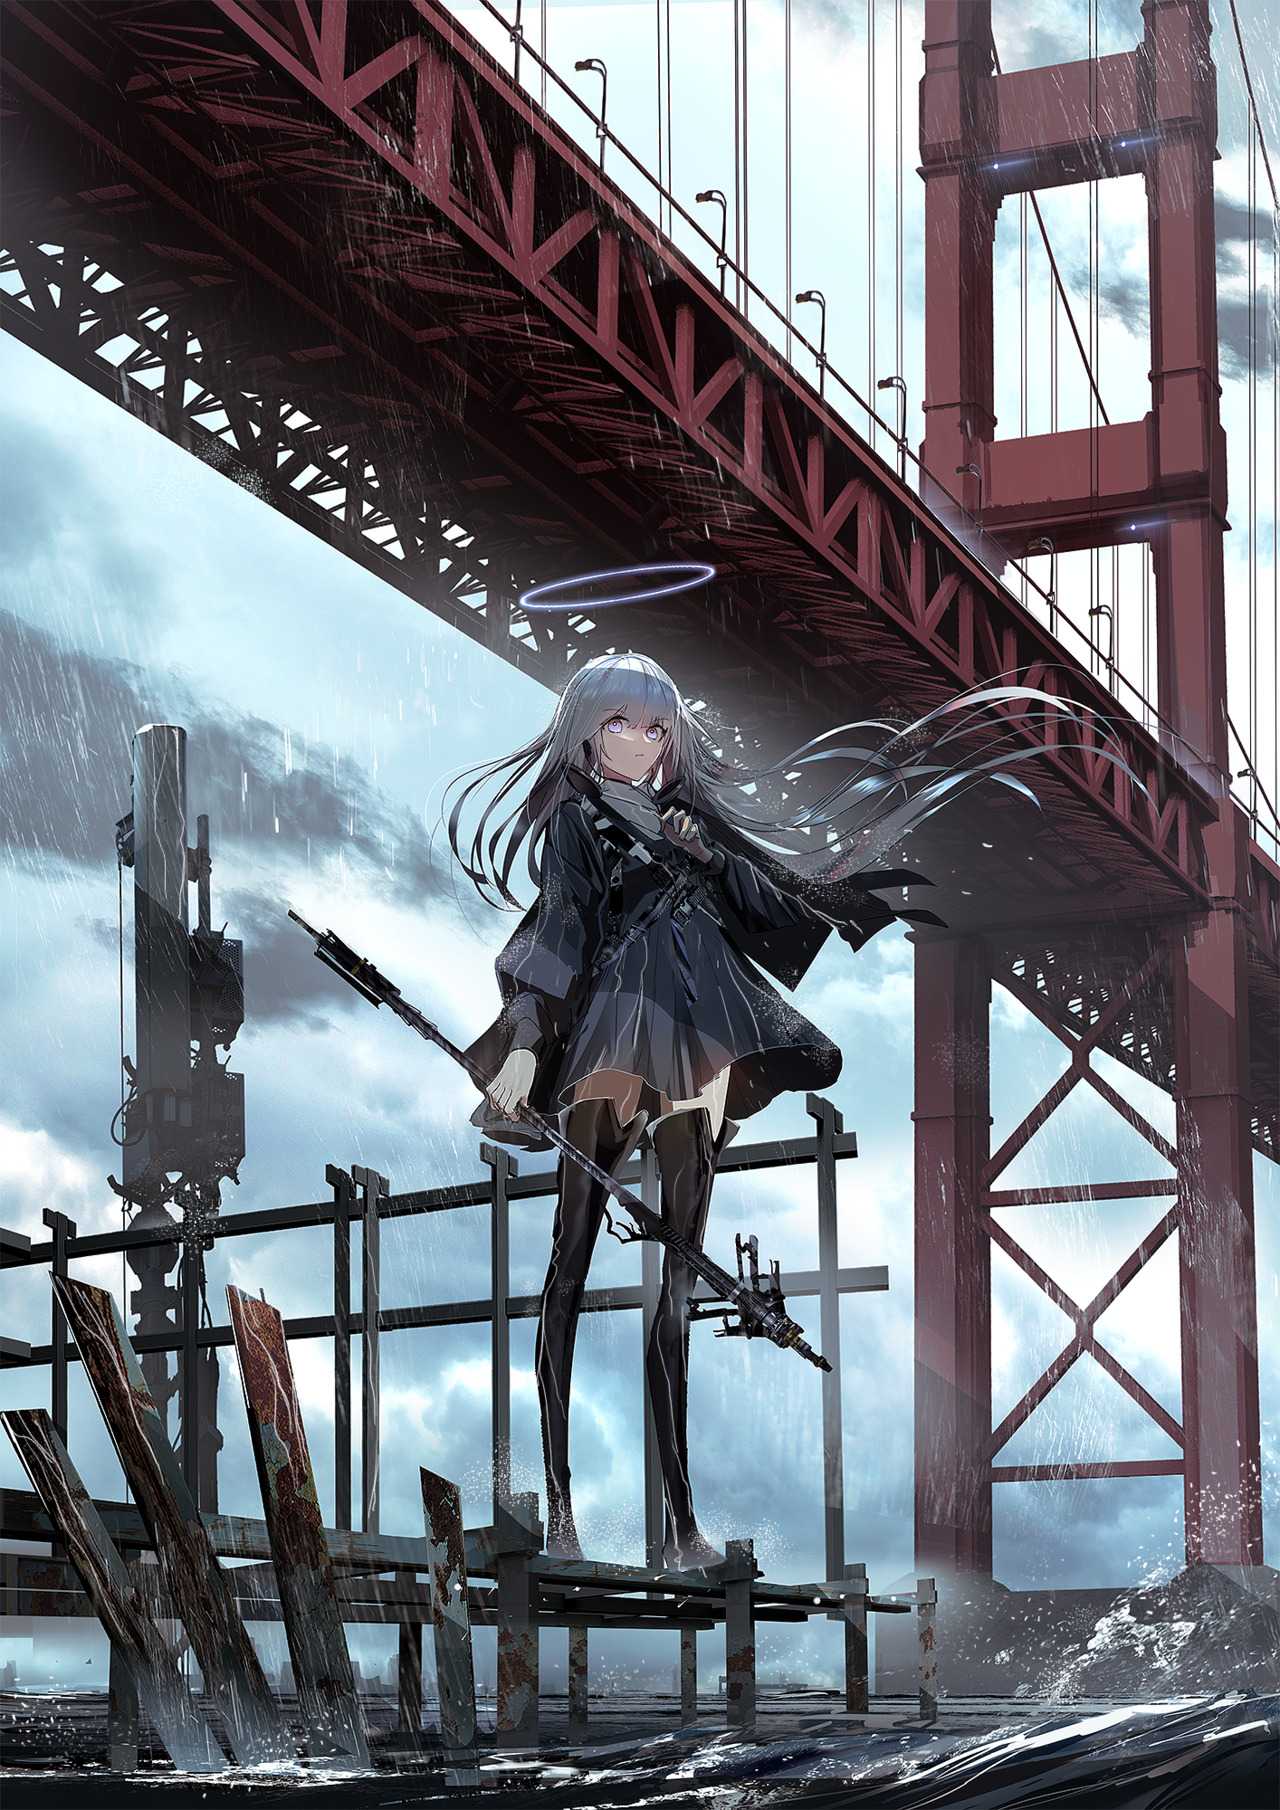 Wallpaper the sky girl clouds sunset the city home anime robots  art the camera ruins swavcoco tosk images for desktop section арт   download